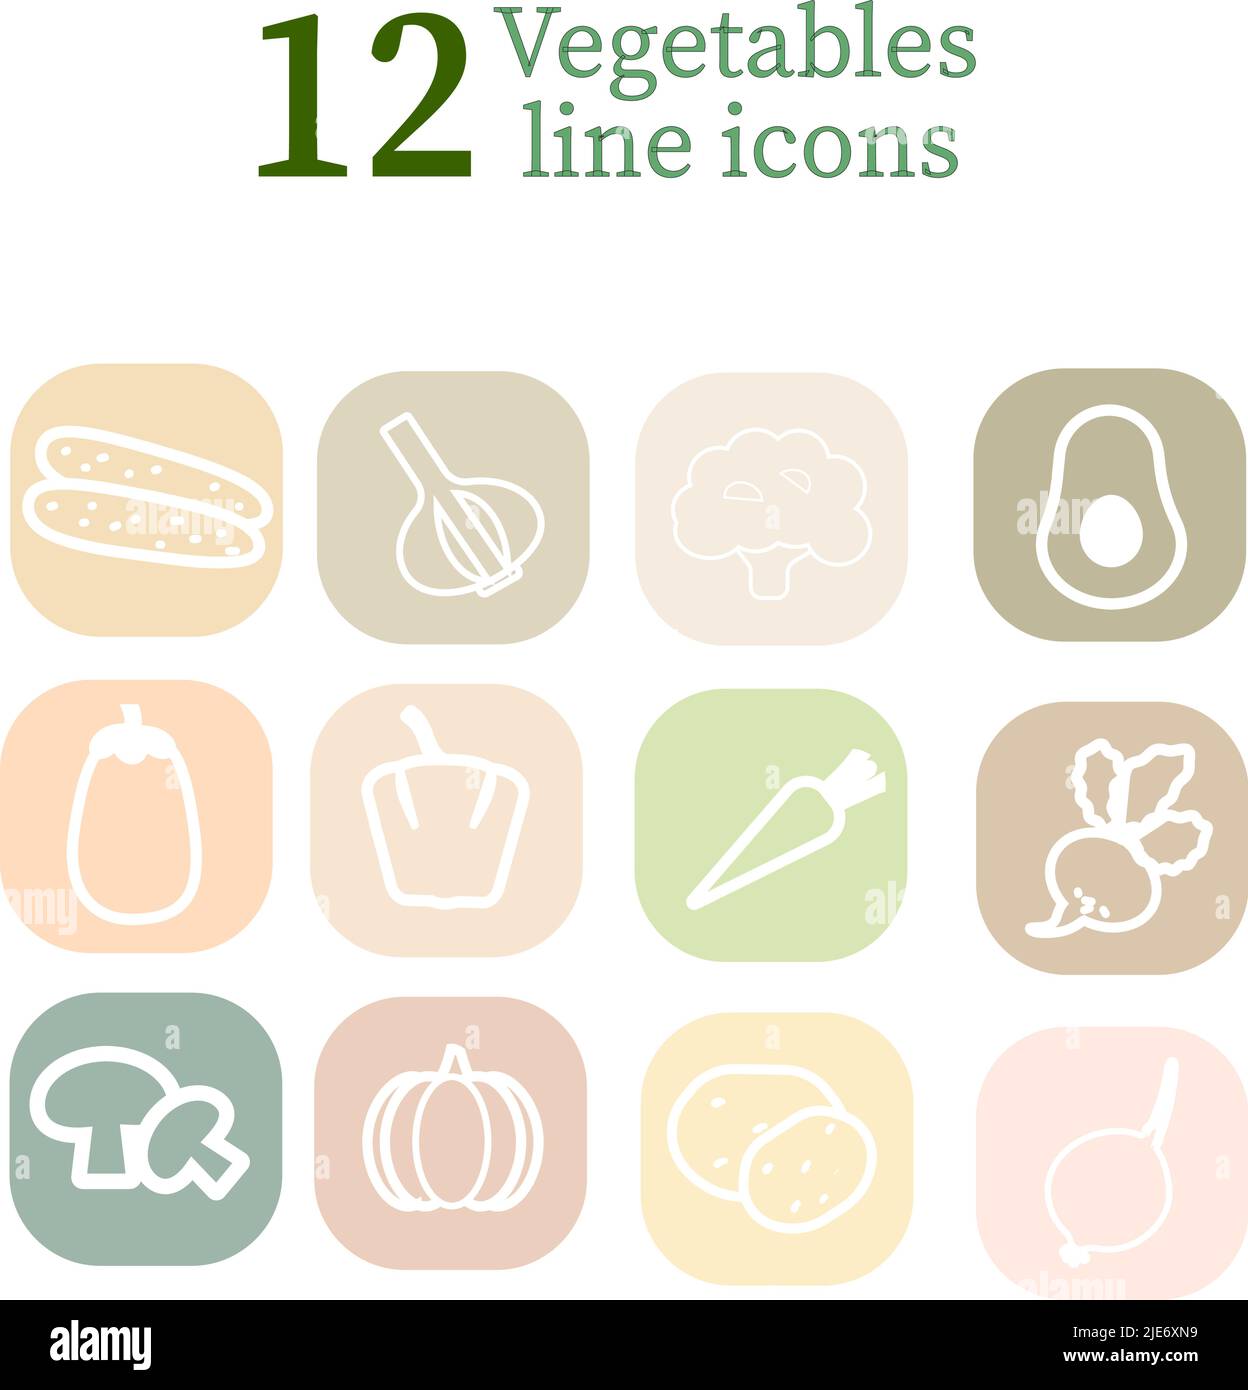 Vegetables line icons. Styled vegetableswhite icons on the colourful stickers. Vector illustration. Healthy food concept. Stock Vector